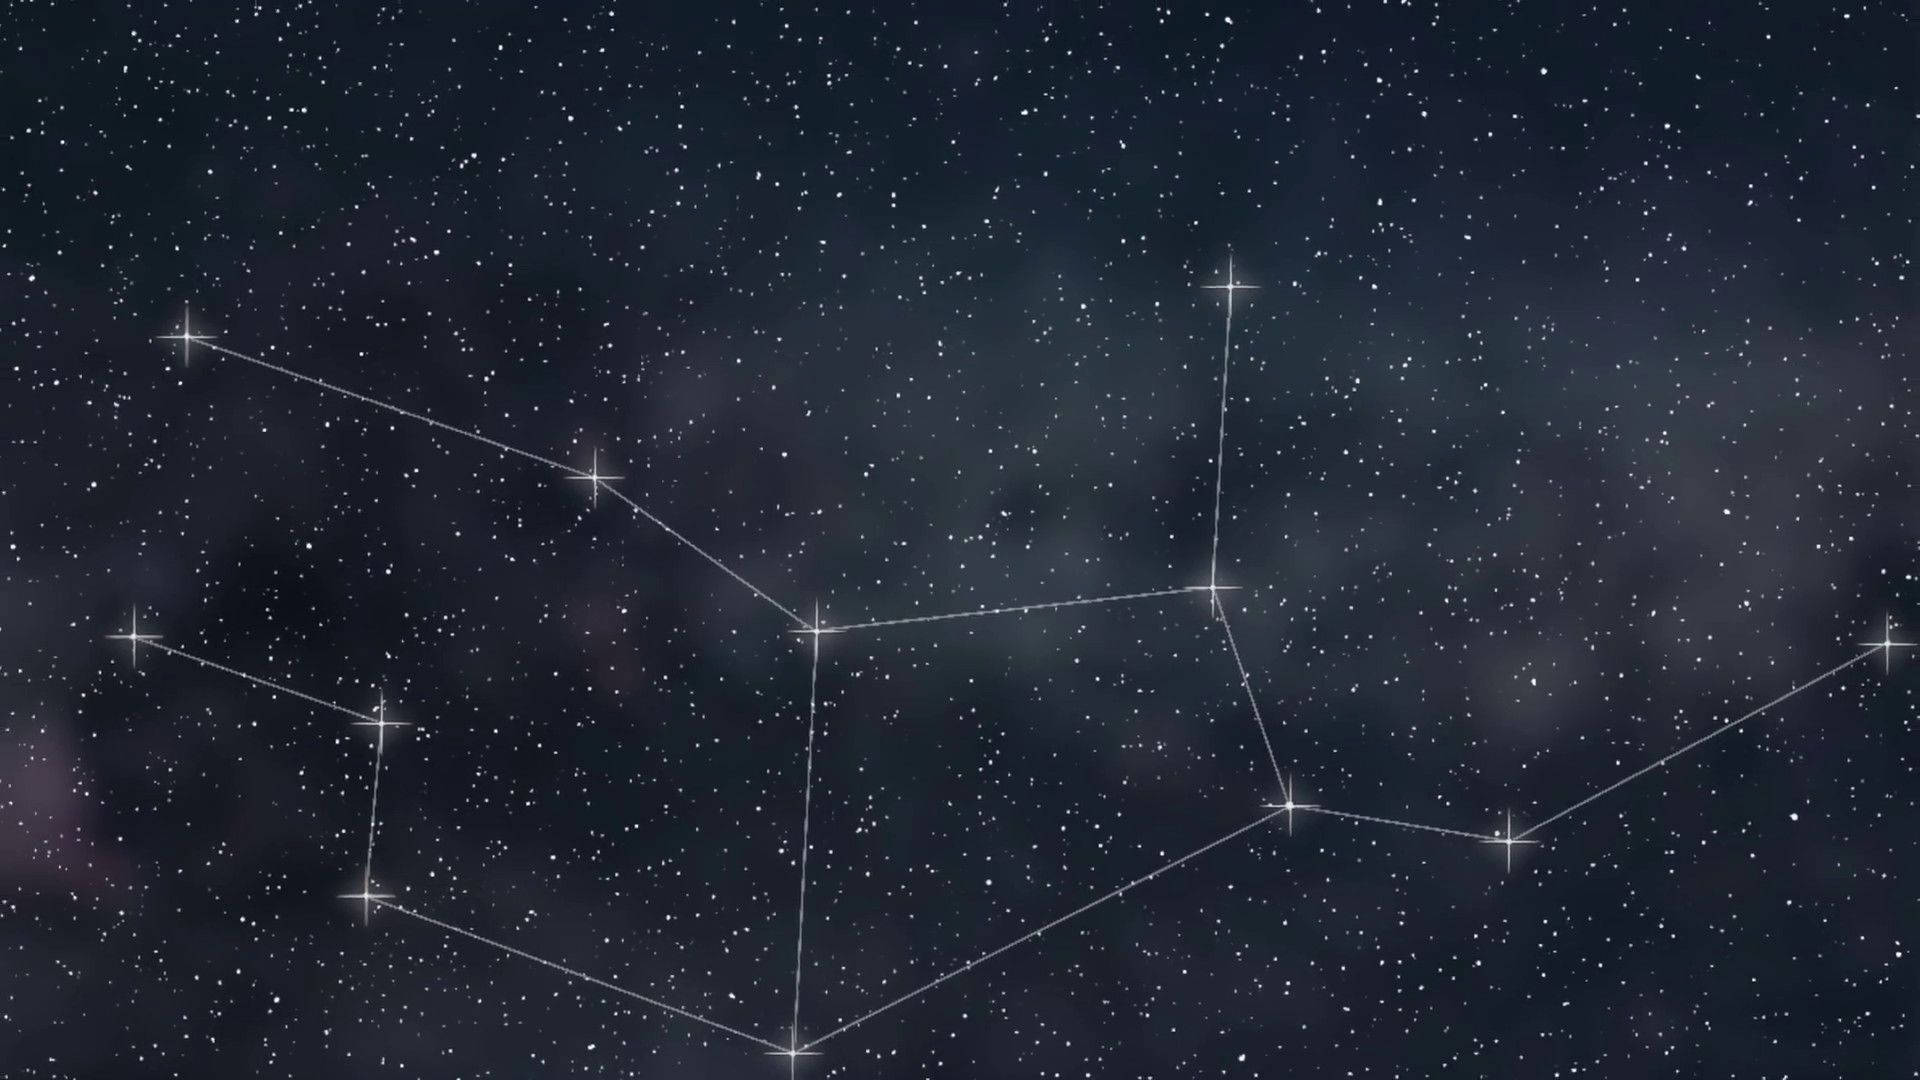 The constellation of aries in an image - Virgo